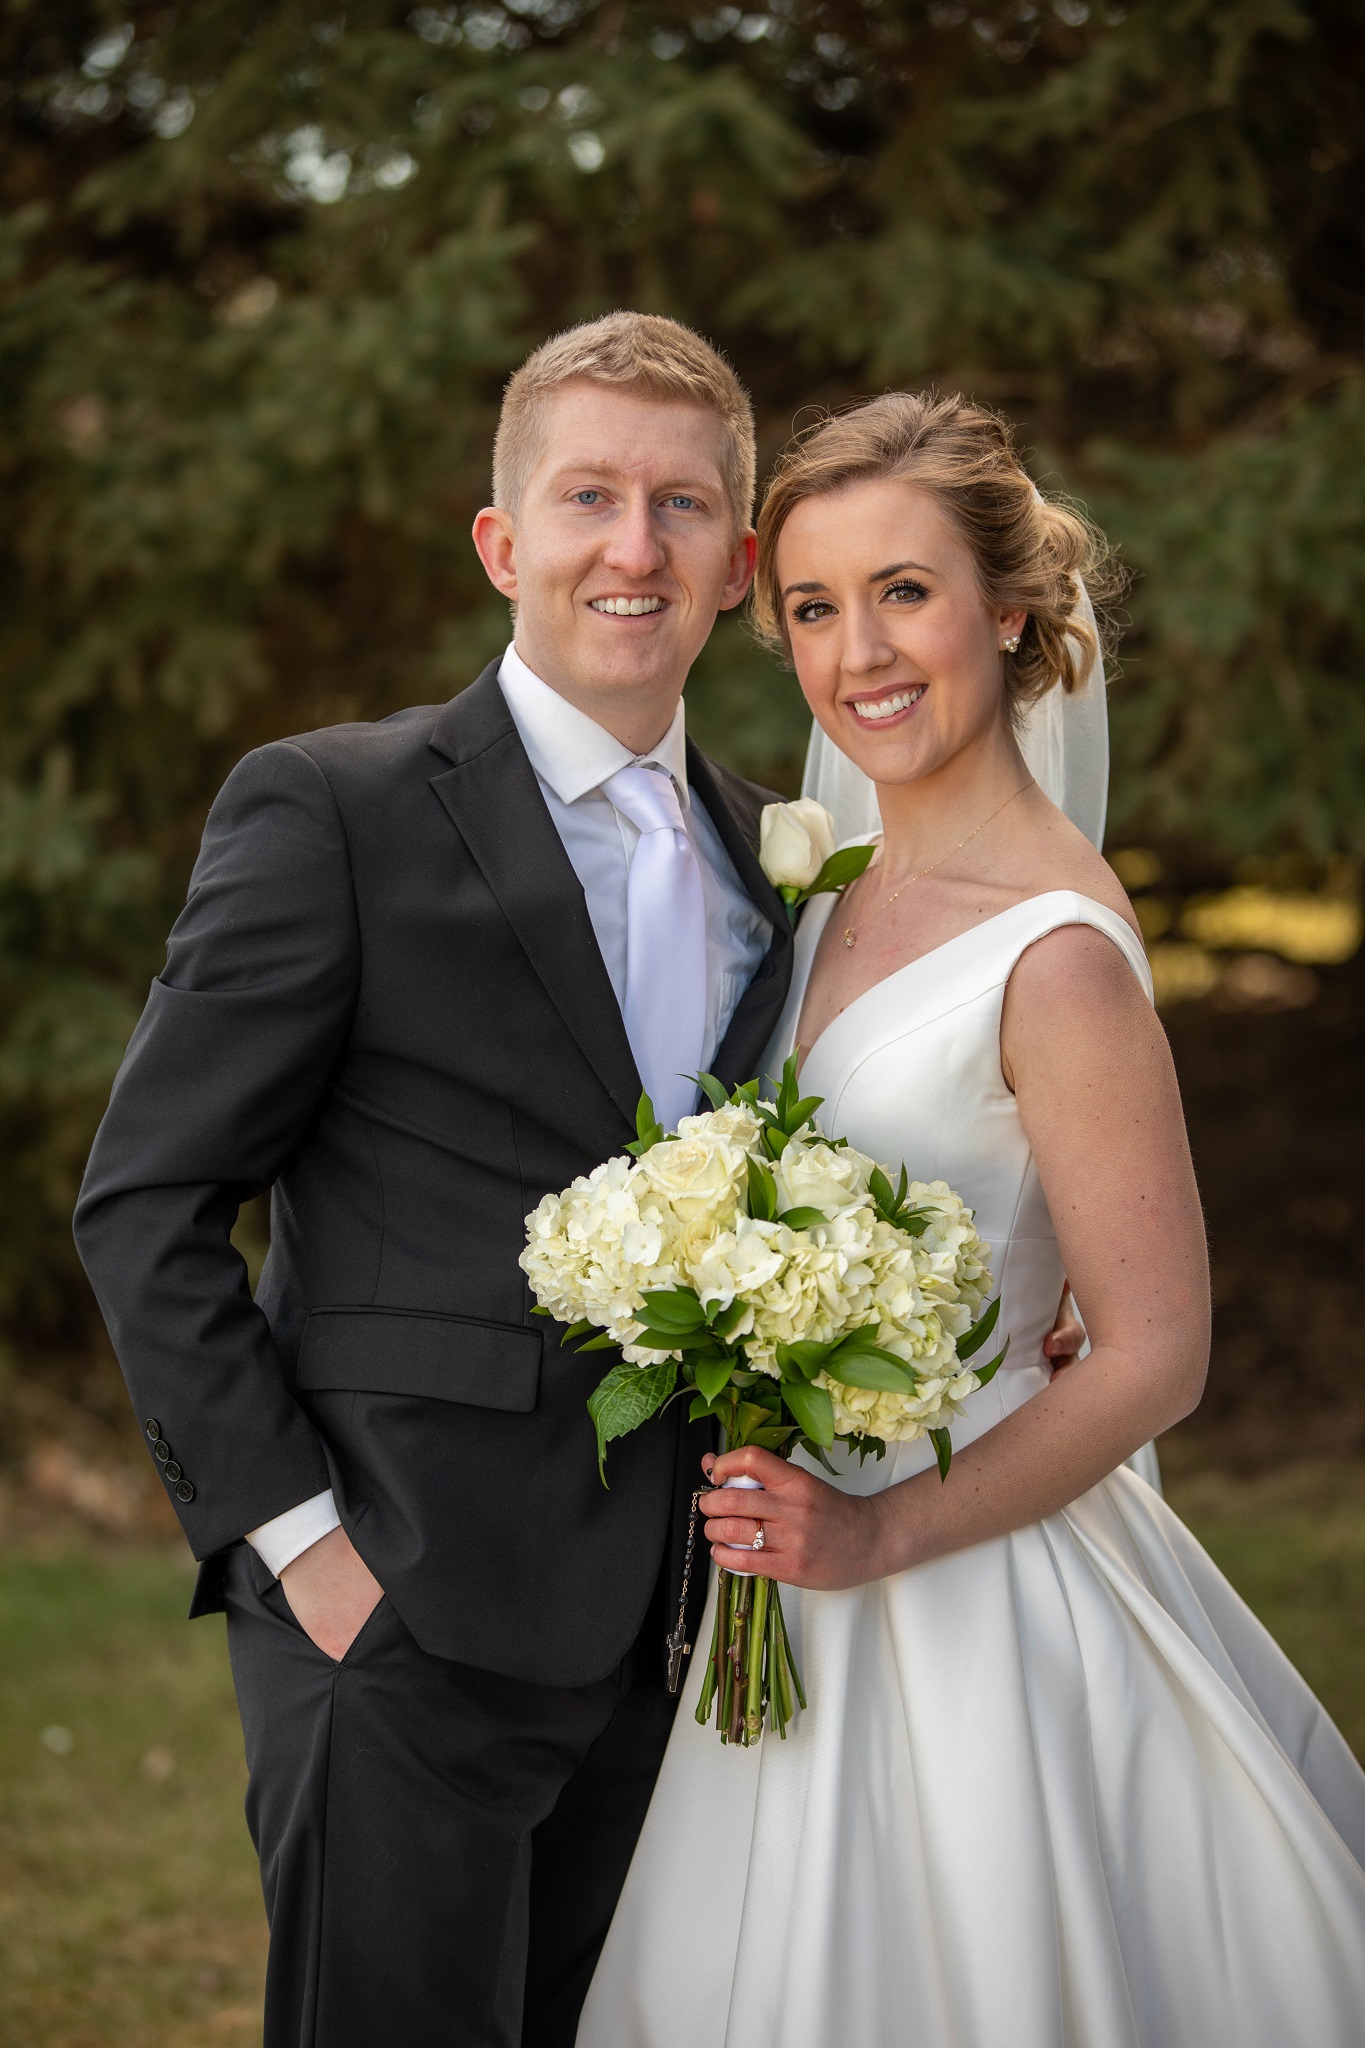 Wedding Photographers in Sioux Falls, SD | Complete Weddings + Events ...